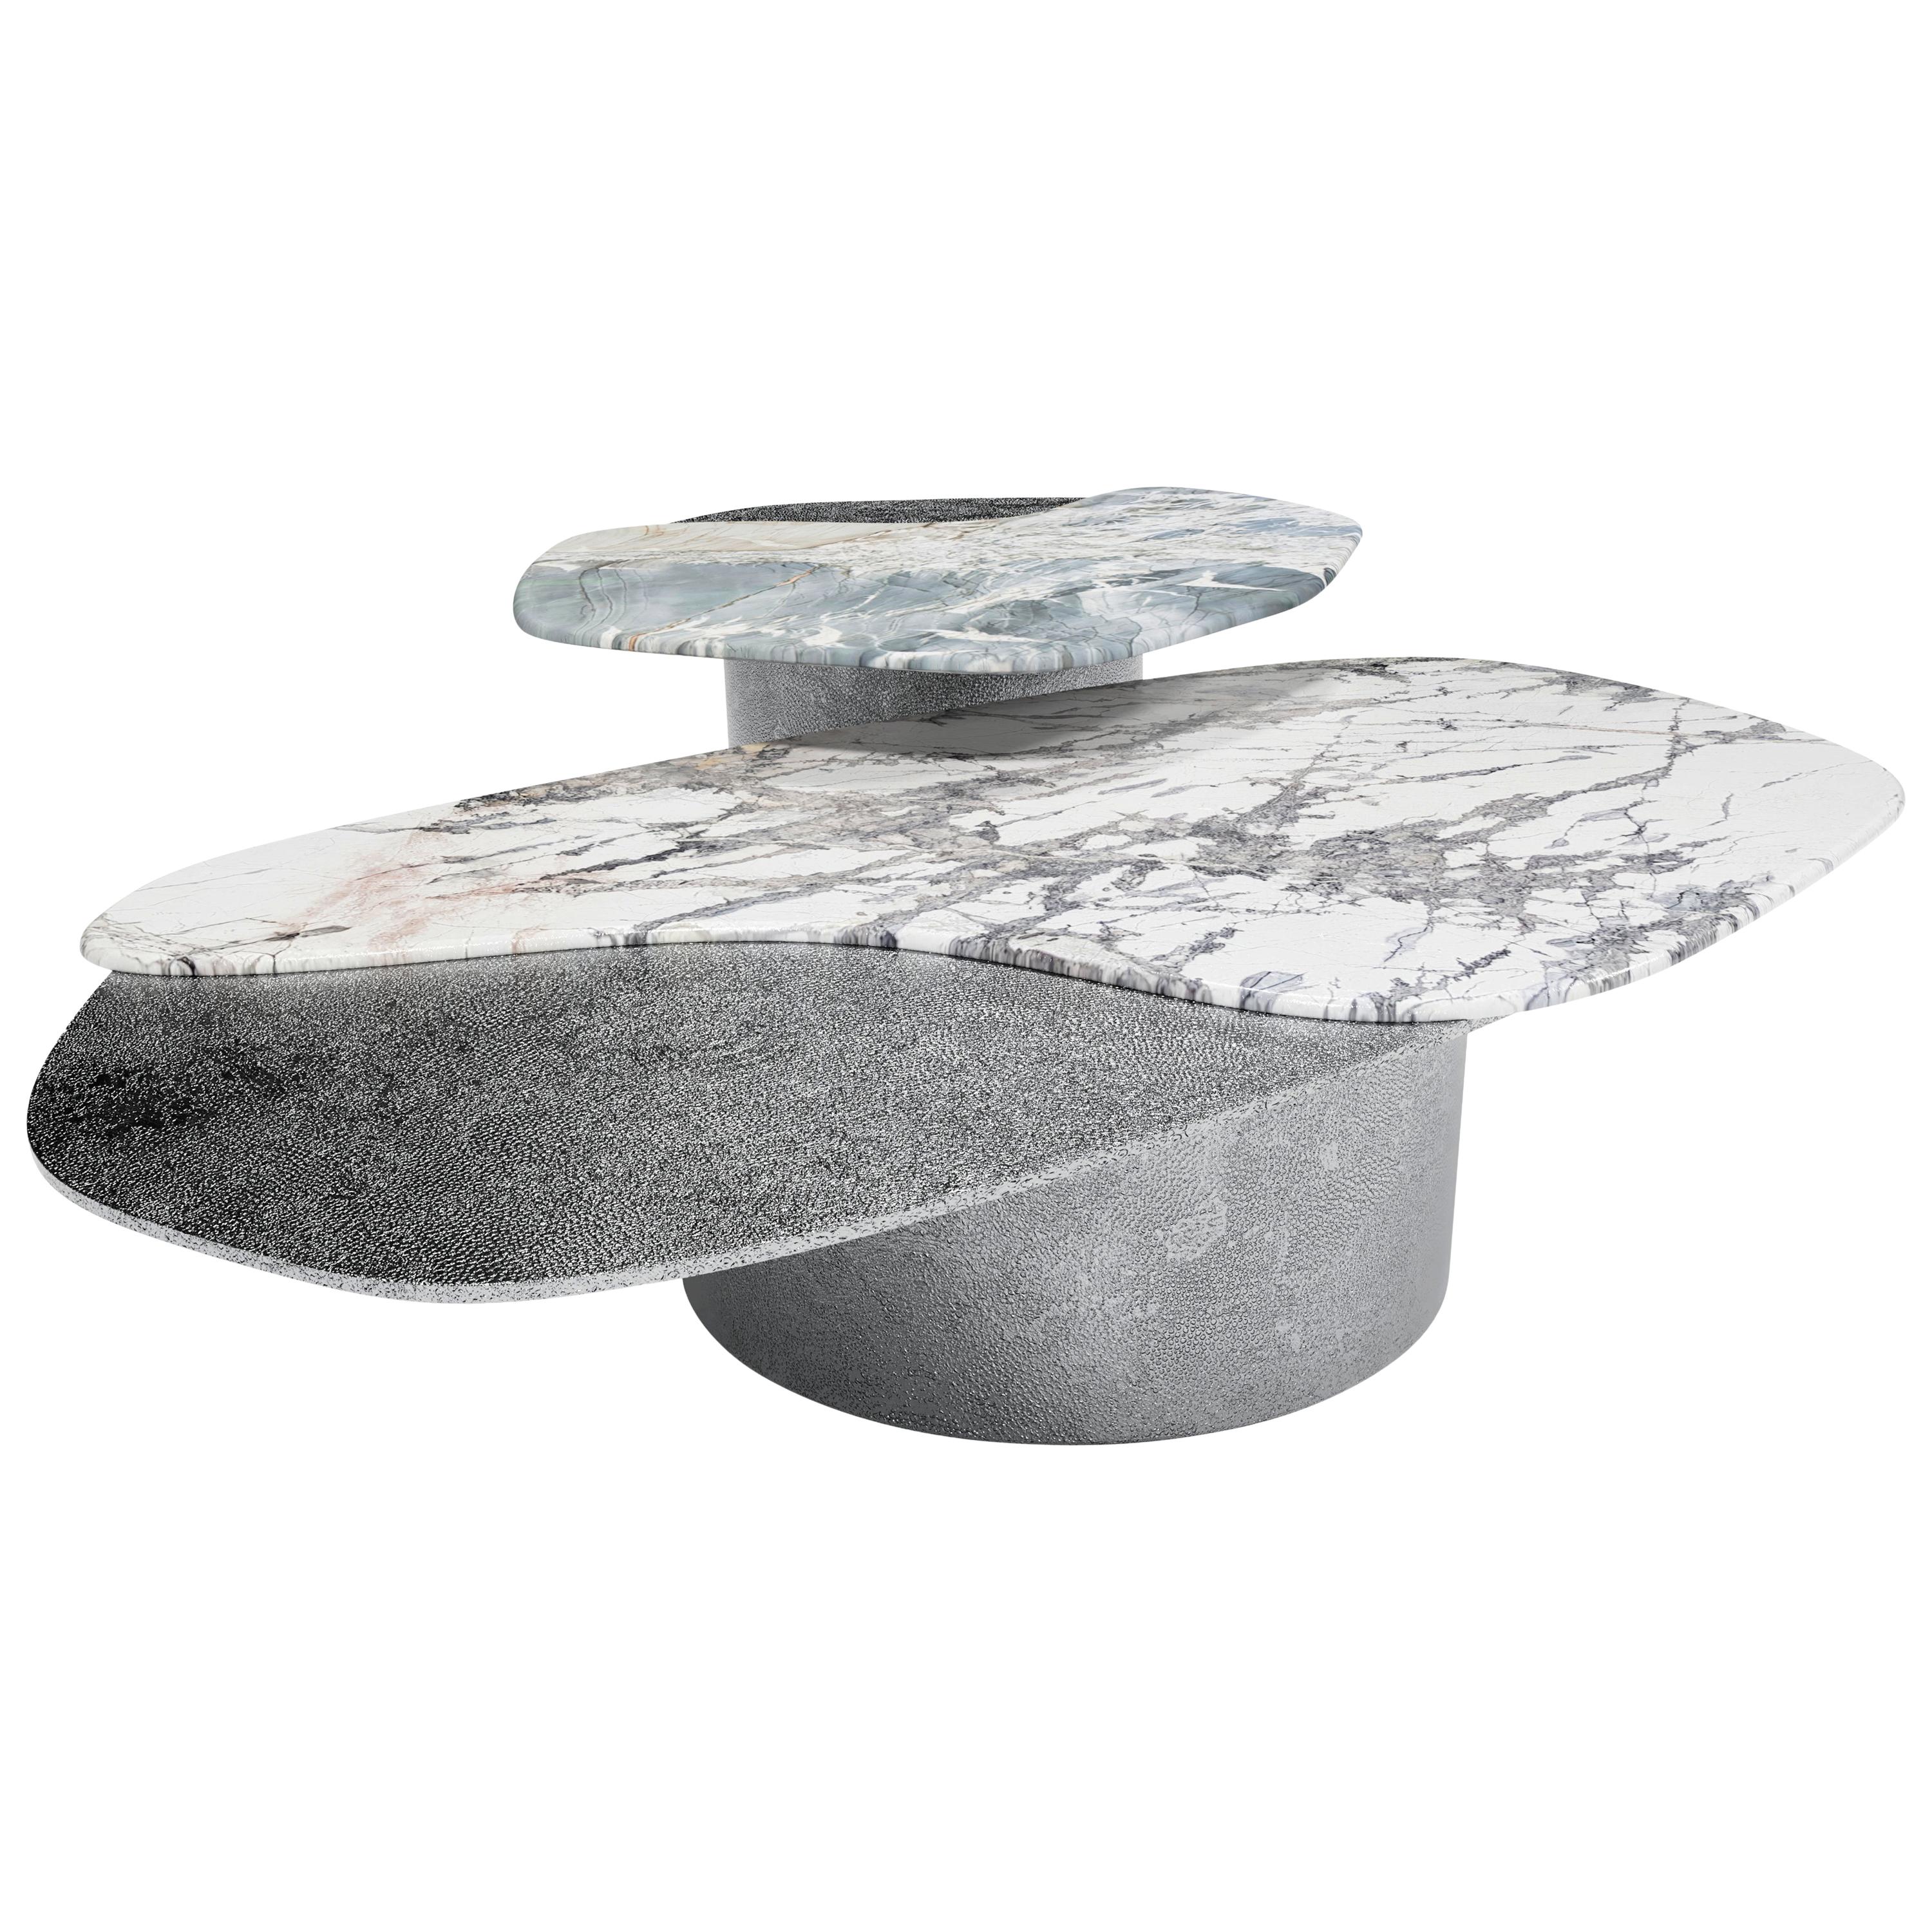 "Epicure IV" Center Table ft. Quartzite, Marble and Liquid Nickel Finish For Sale